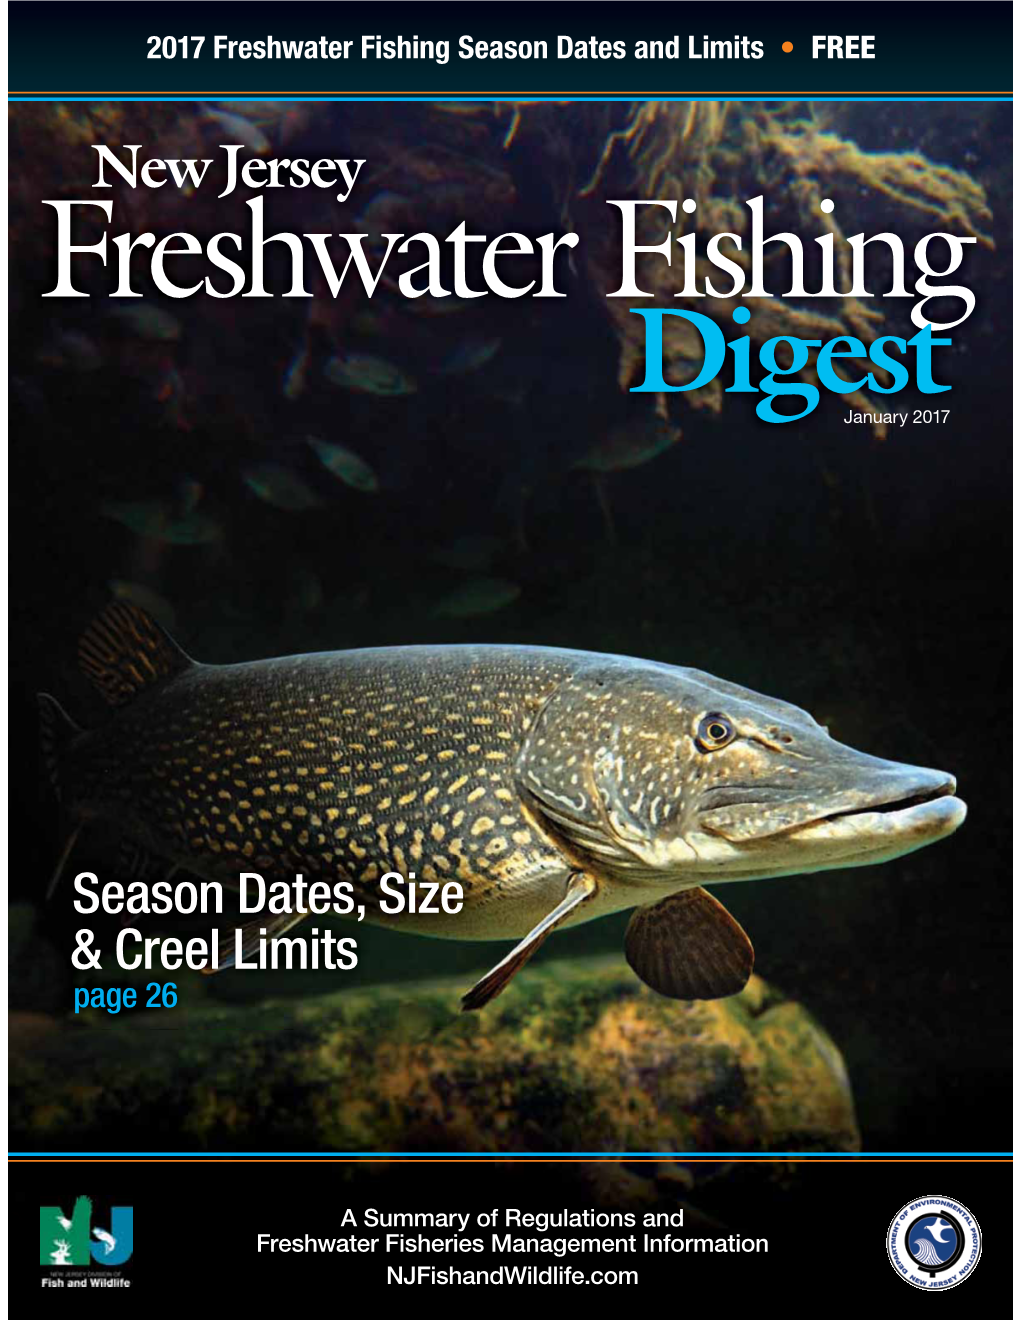 Complete 2017 Freshwater Fishing DIGEST